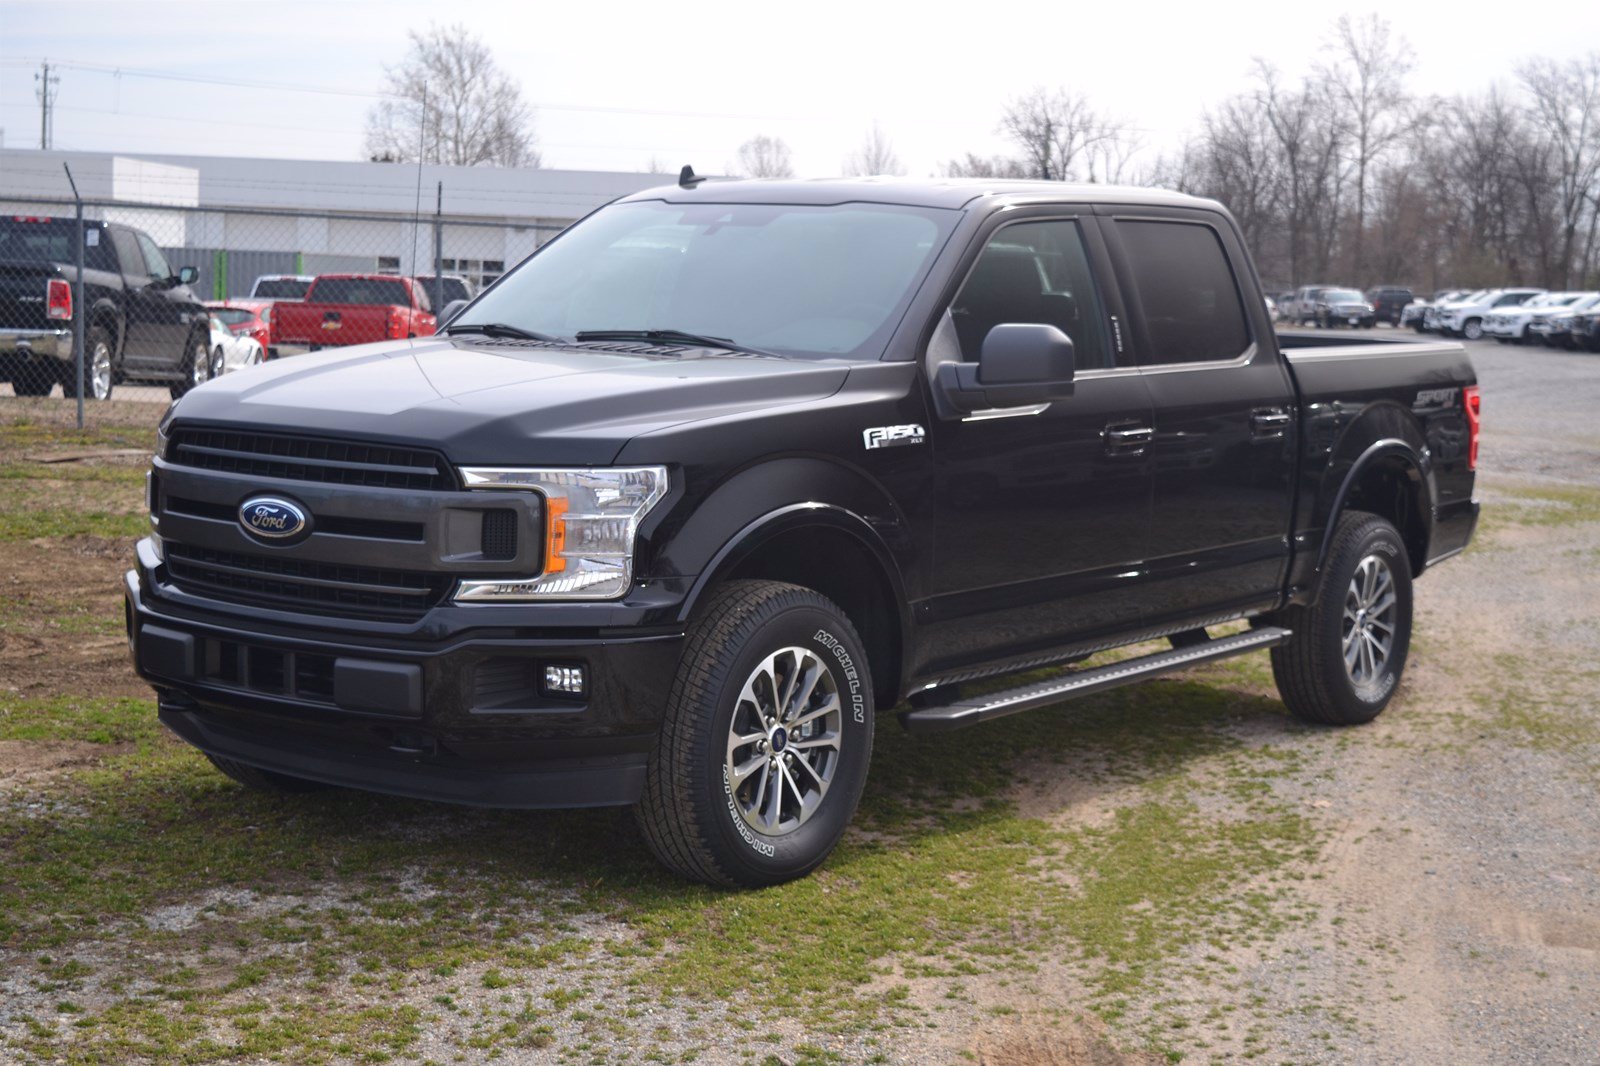 New 2020 Ford F 150 Xlt 4wd Crew Cab Crew Cab Pickup In Fayetteville